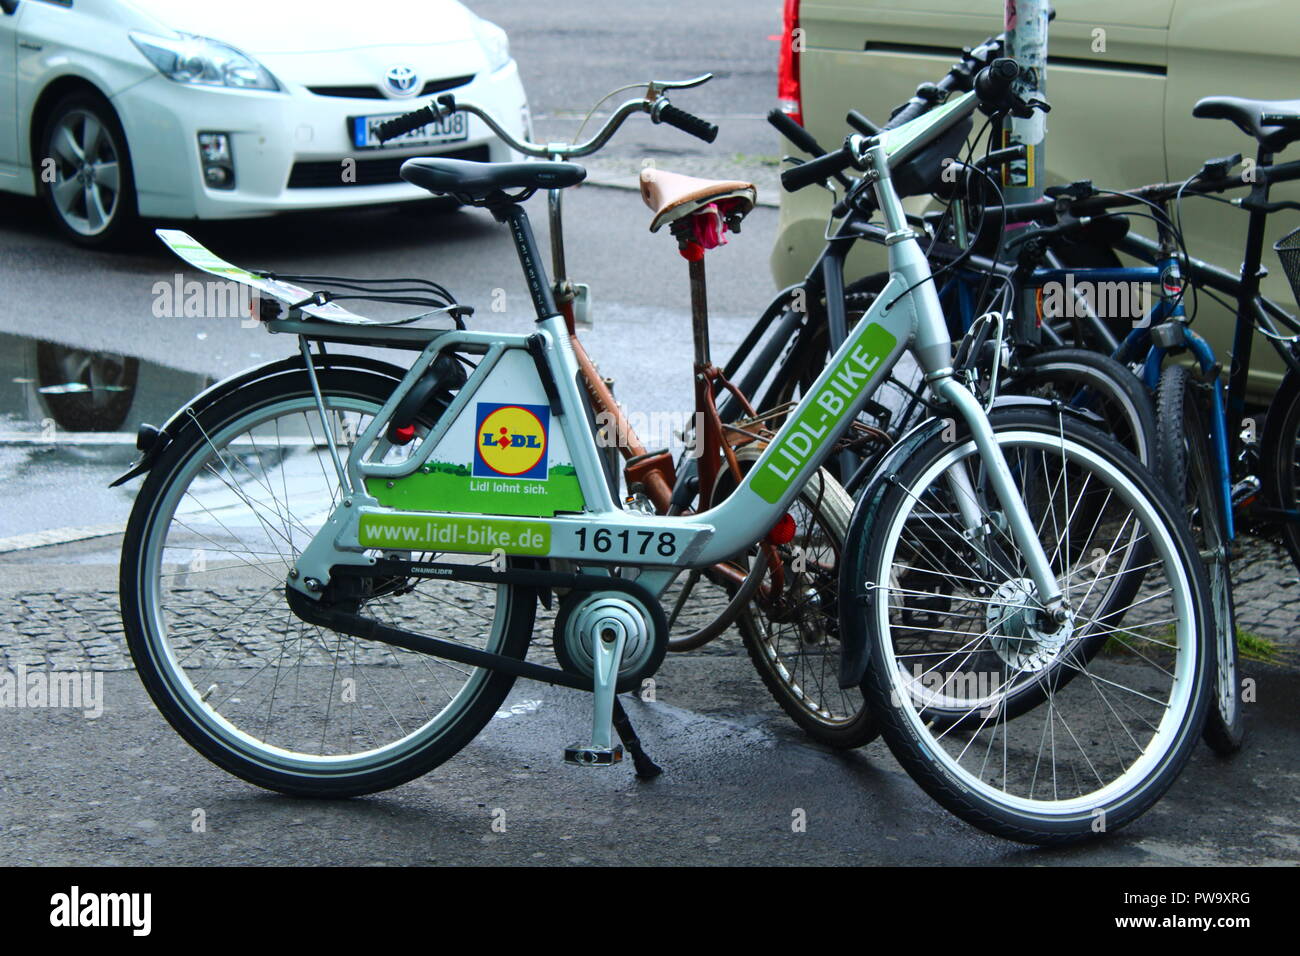 Lidl Bike - Berlin Bike Sharing Scheme - Public cycling - with other bikes and car in background Stock Photo